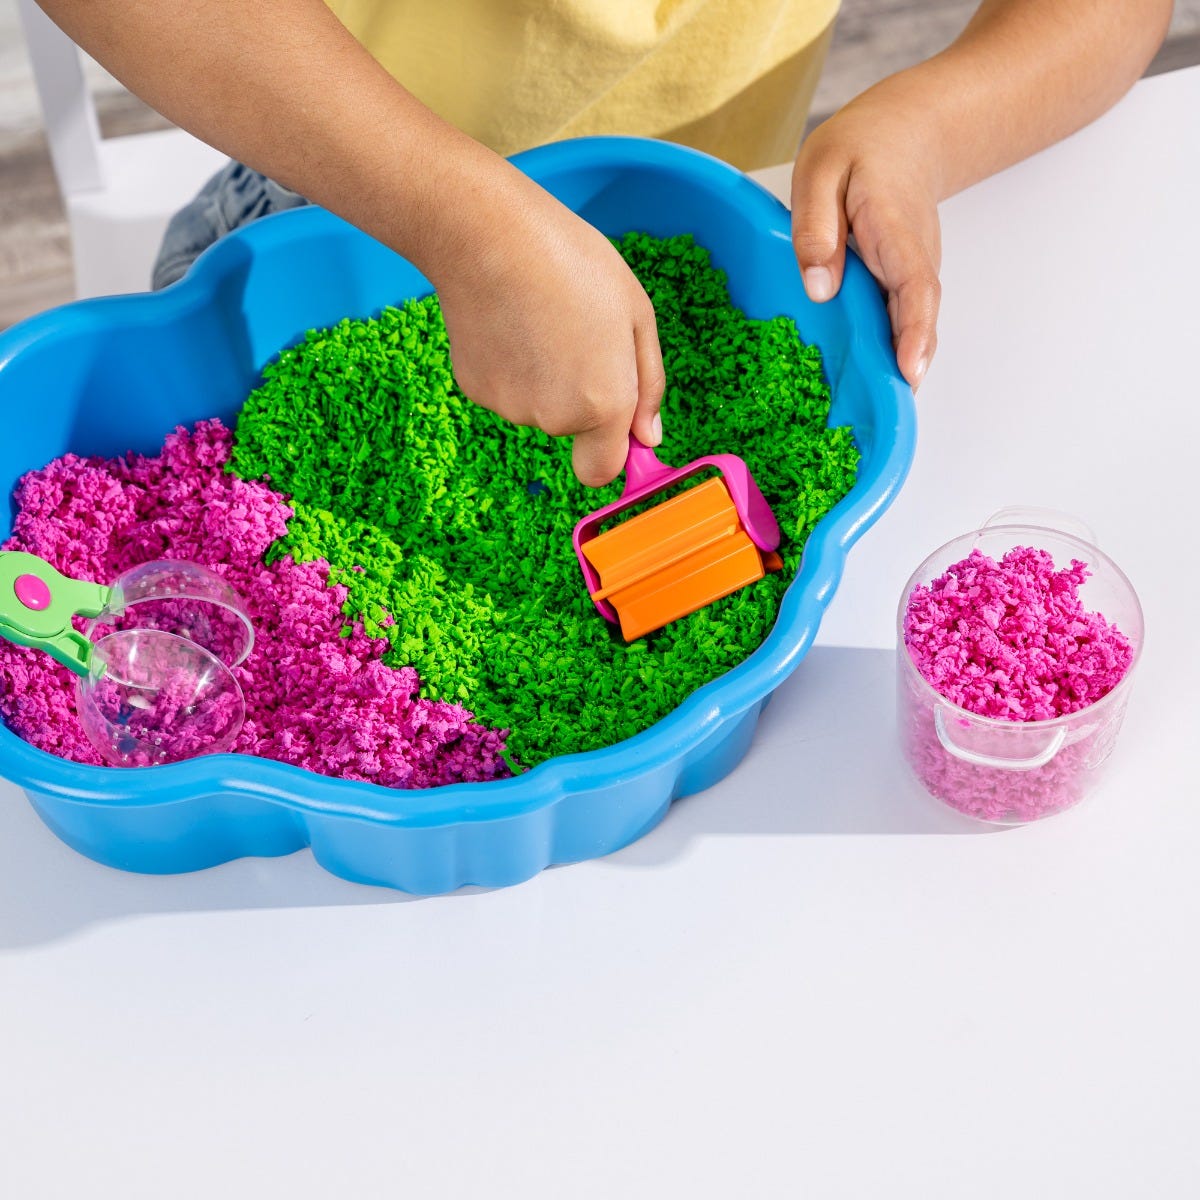 Playfoam Pluffle Sensory Station, The Playfoam Pluffle™ Sensory Station is the fun sensory play toy that’s great for building fine motor skills in the classroom or at home. It comes ready for play with 2 colours of feelgood, fluffy Playfoam Pluffle sensory play toys, and 3 fine motor skills tools in a handy Sensory Station storage bin. As children scoop, squish, roll, and pour their Playfoam Pluffle, they build fine motor skills, including scissor skills. Playfoam Pluffle sensory toys help children build fi